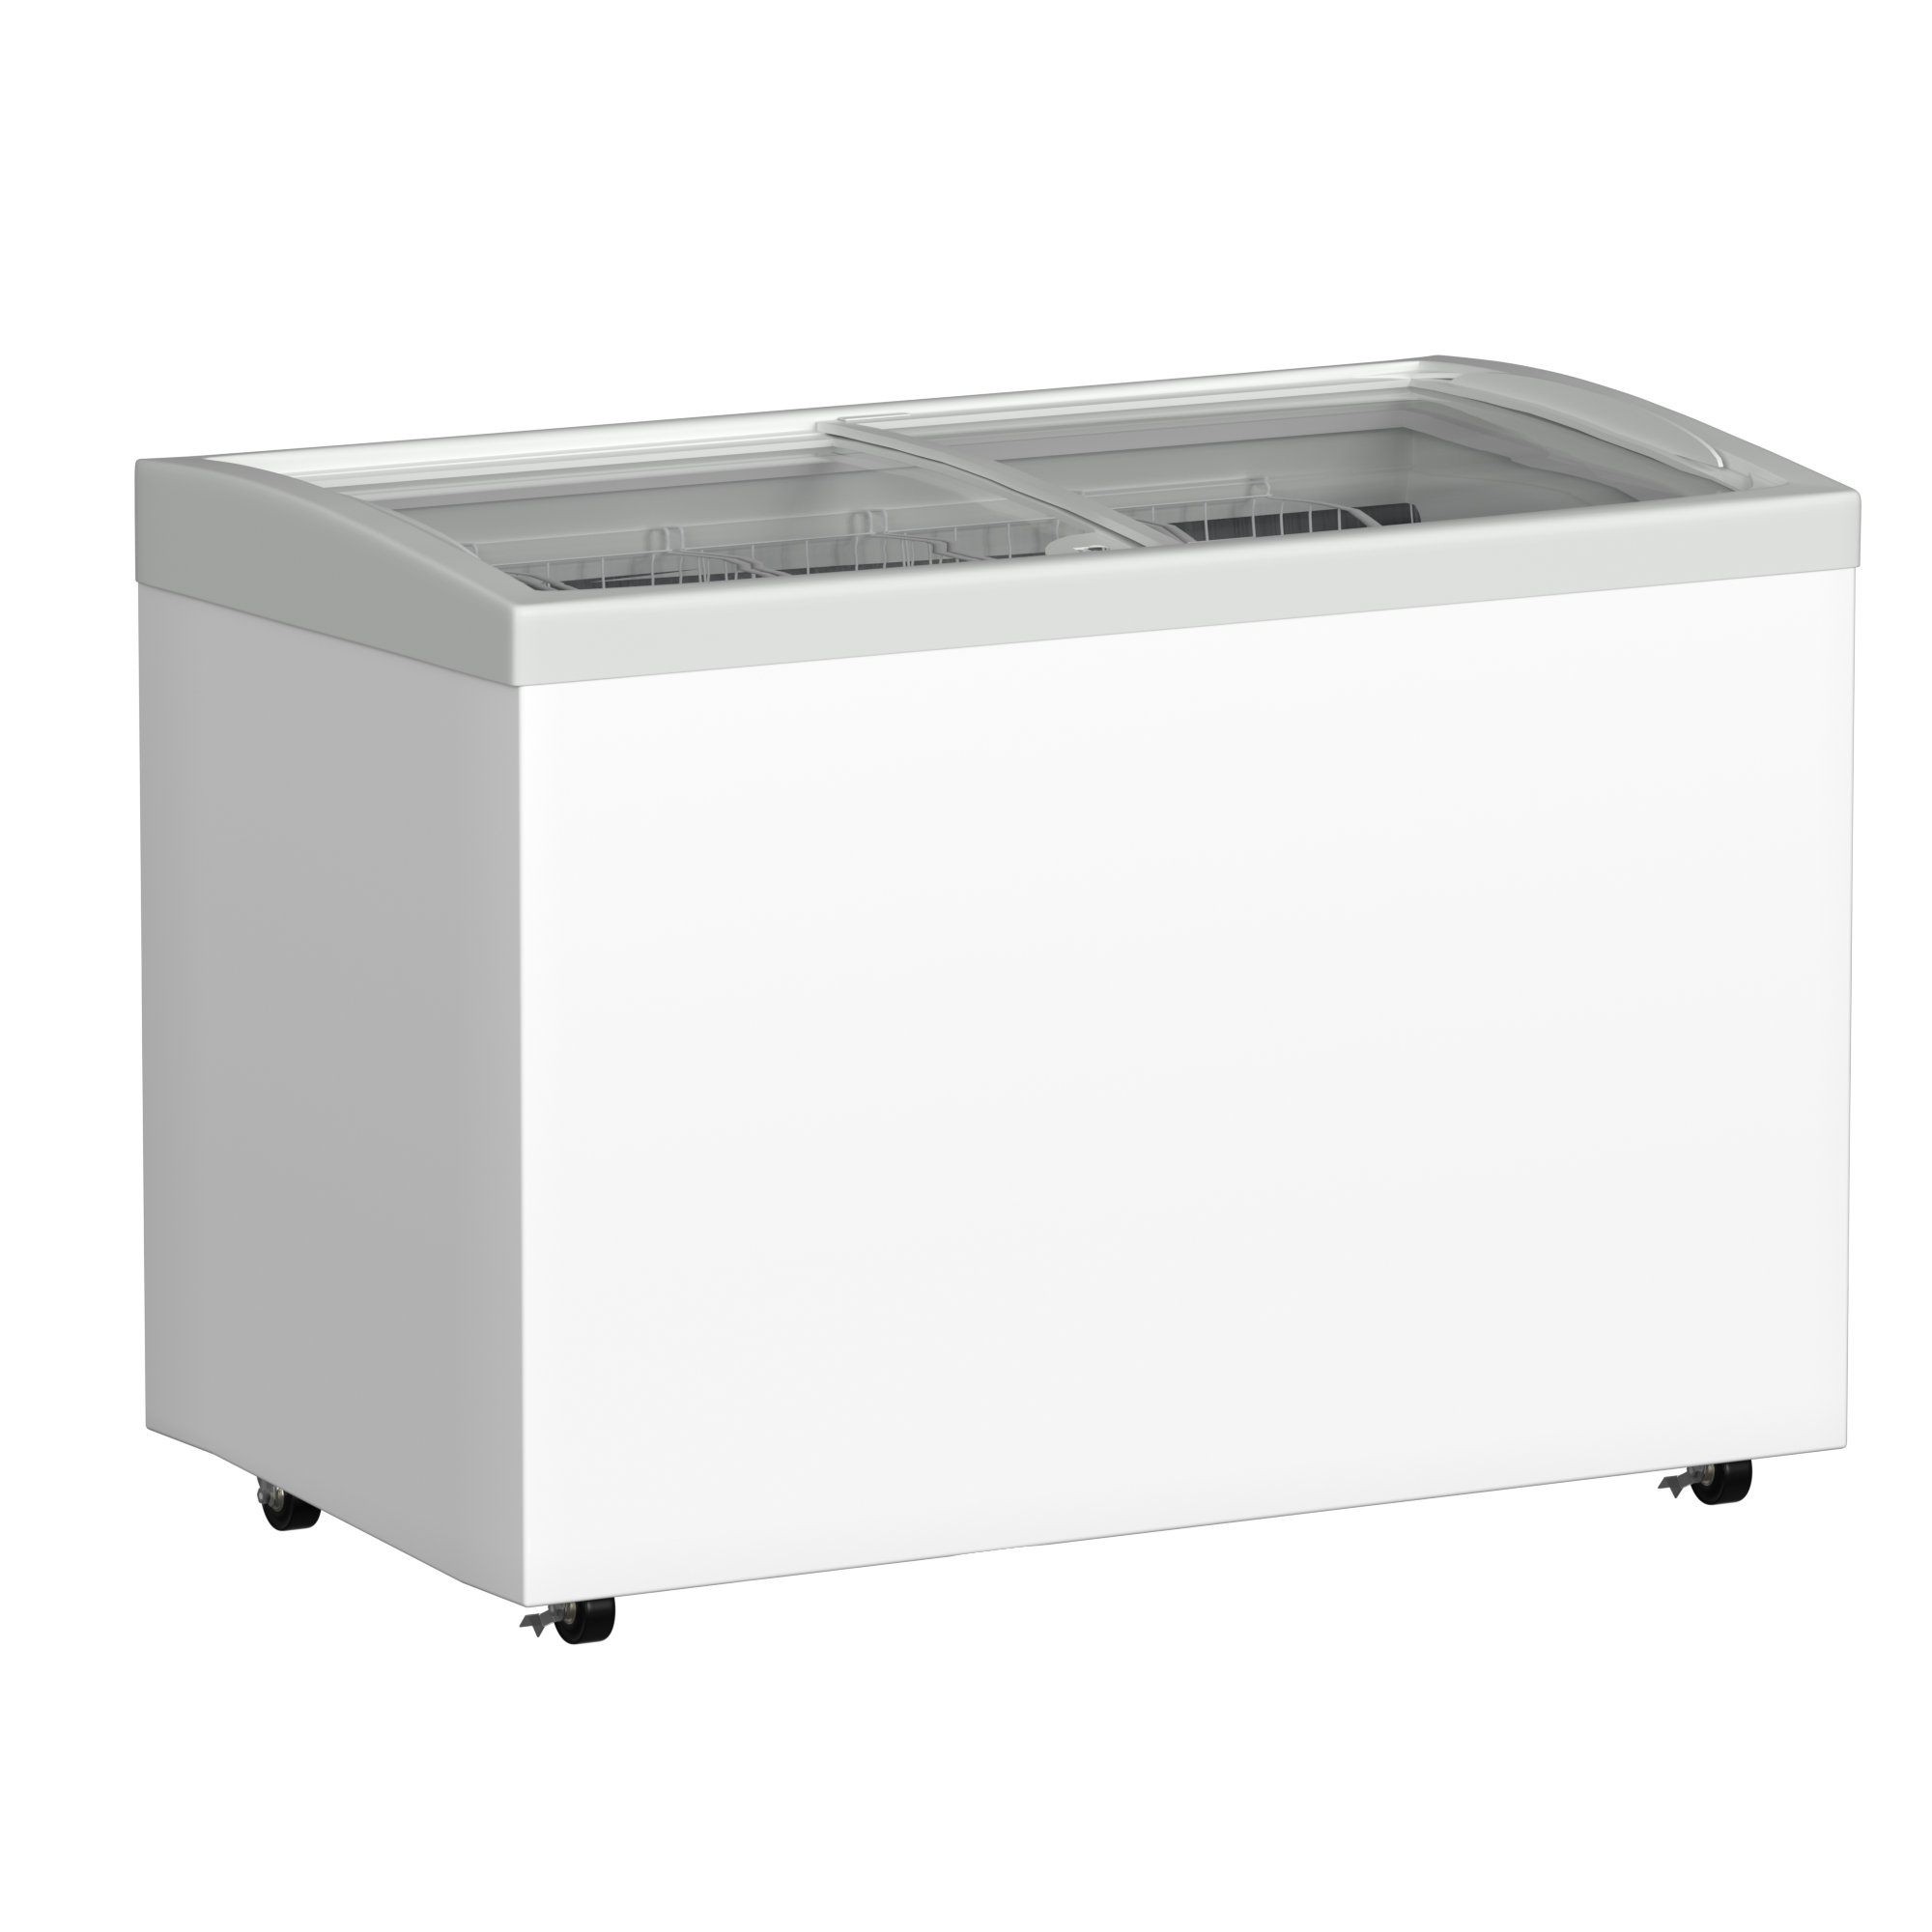 Haier 13.8-cu ft Frost-free Upright Freezer (White) at